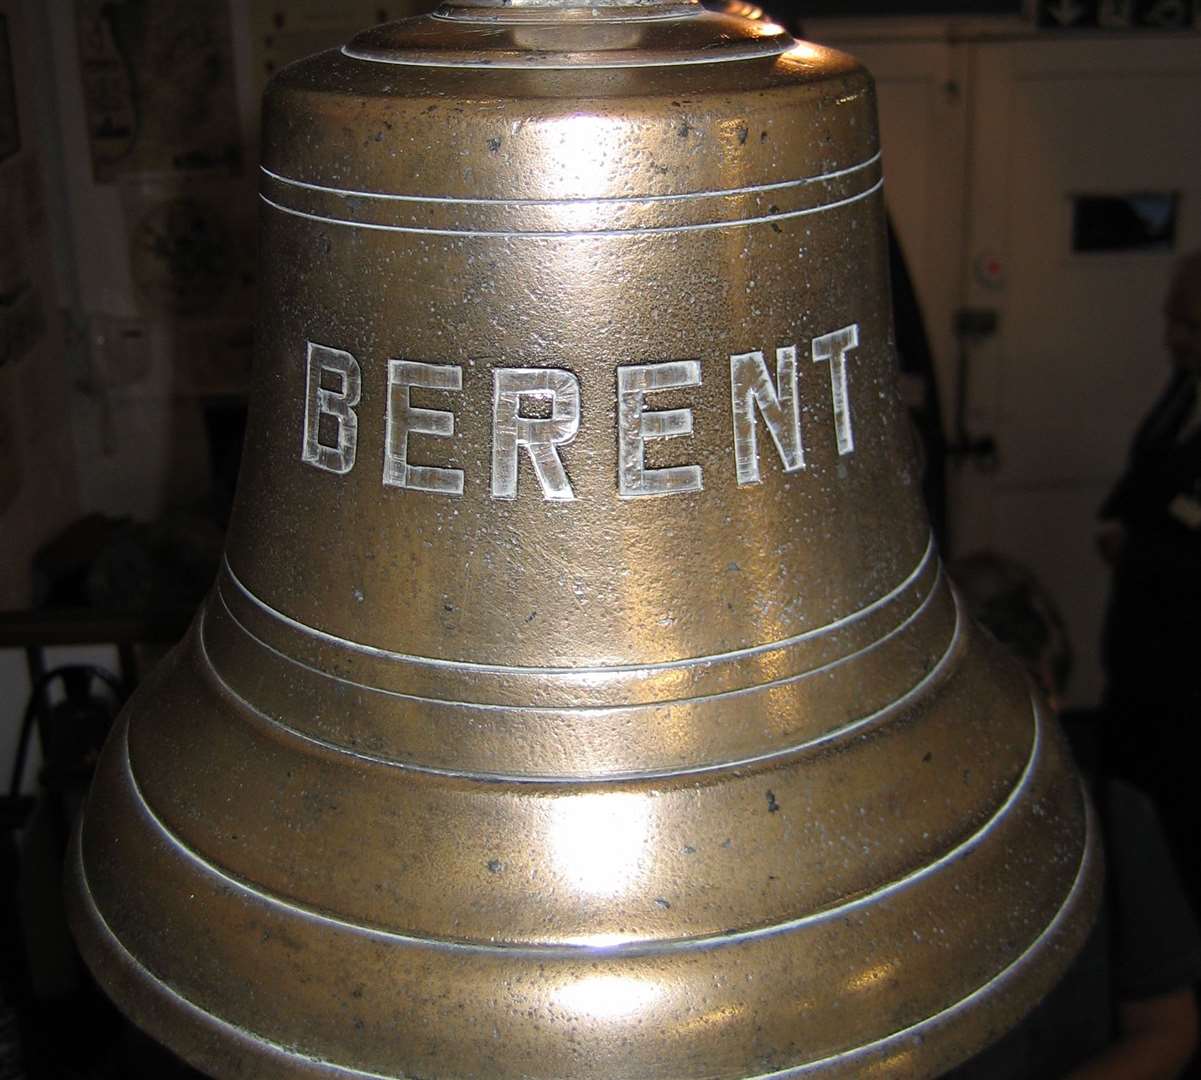 The original ship's bell, now in Deal Maritime Museum